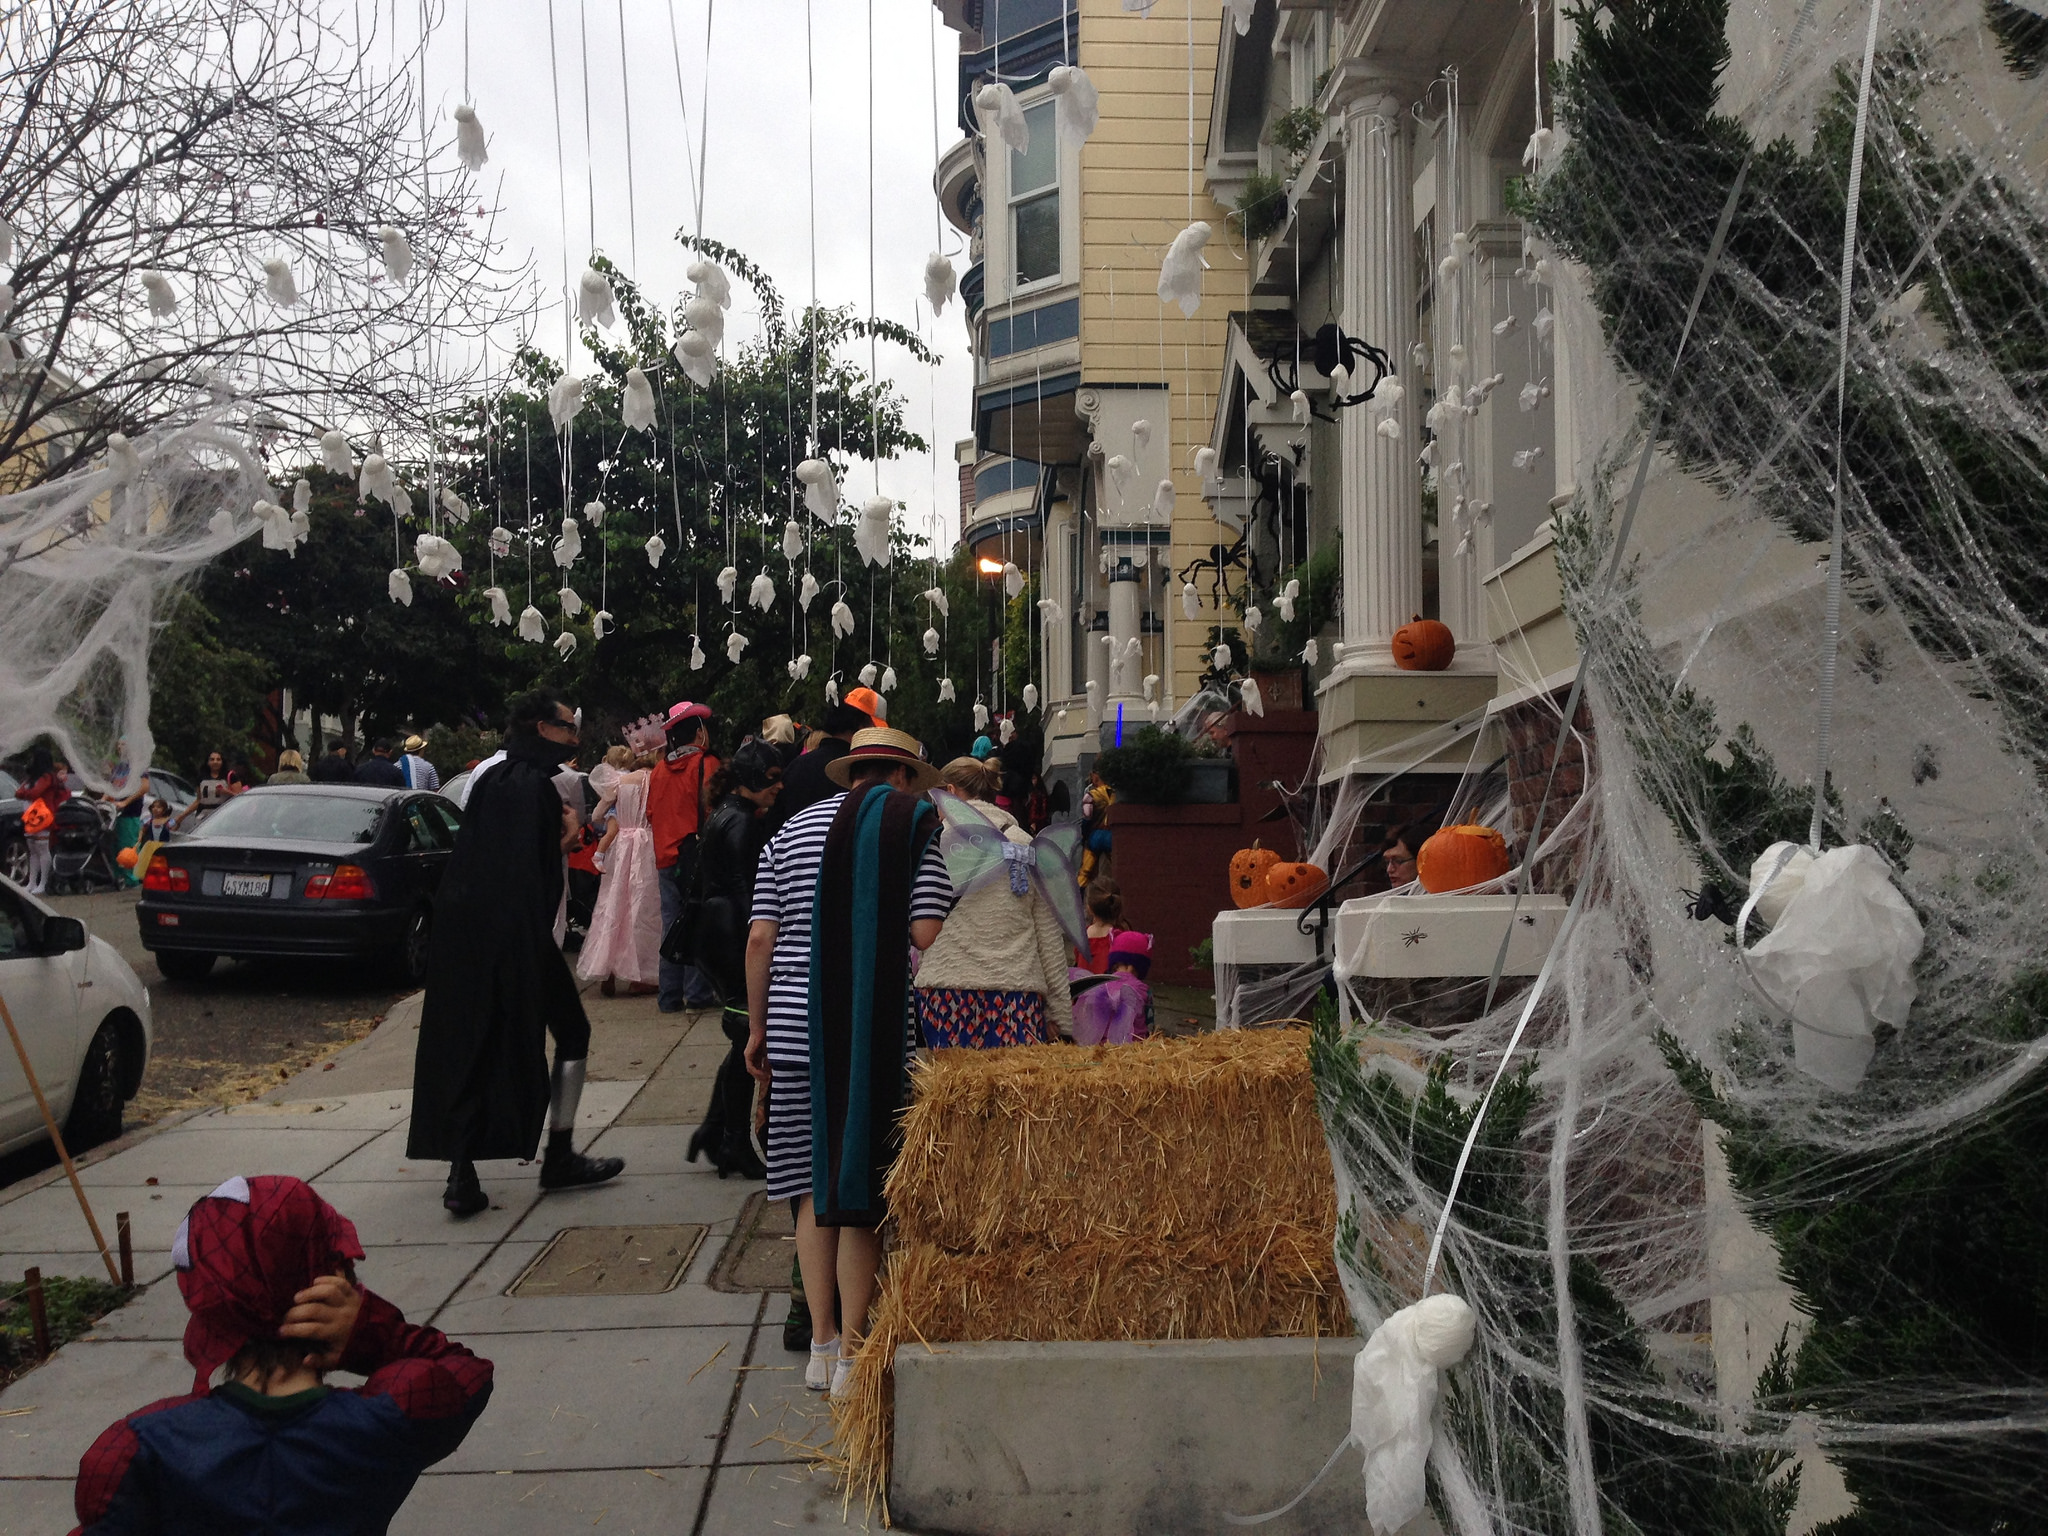 Neighborhood street with adults and children in costumes, bales of hay, ghosts and spiderwebs decorations